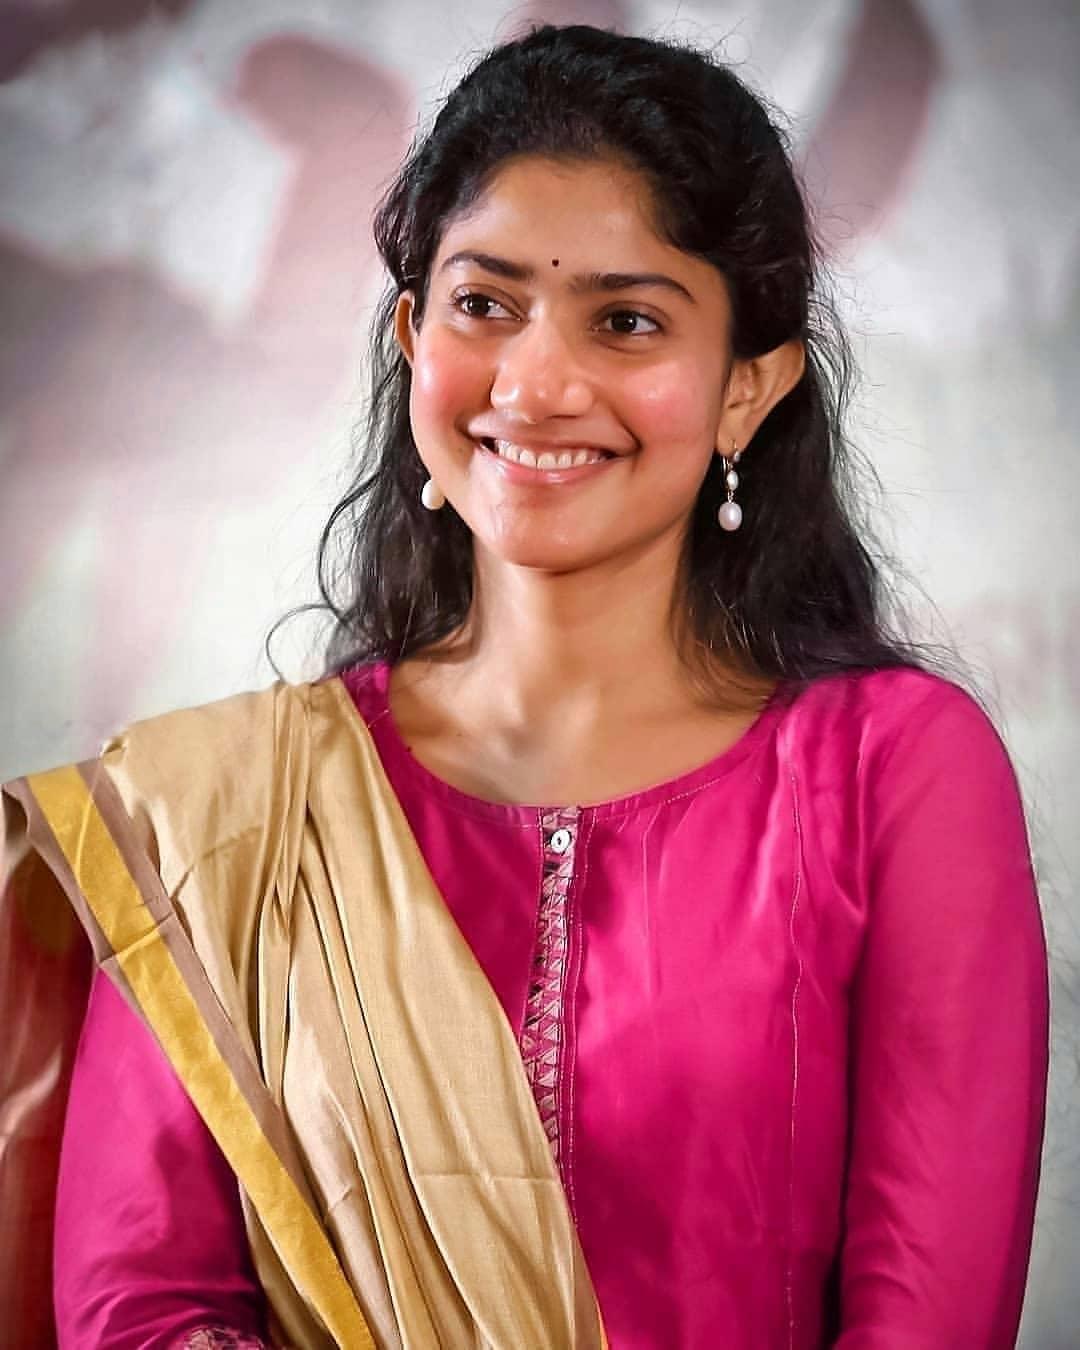 Sai Pallavi latest hot and spicy photos | Sai Pallavi looking very  glamorous photos Photos: HD Images, Pictures, Stills, First Look Posters of  Sai Pallavi latest hot and spicy photos | Sai